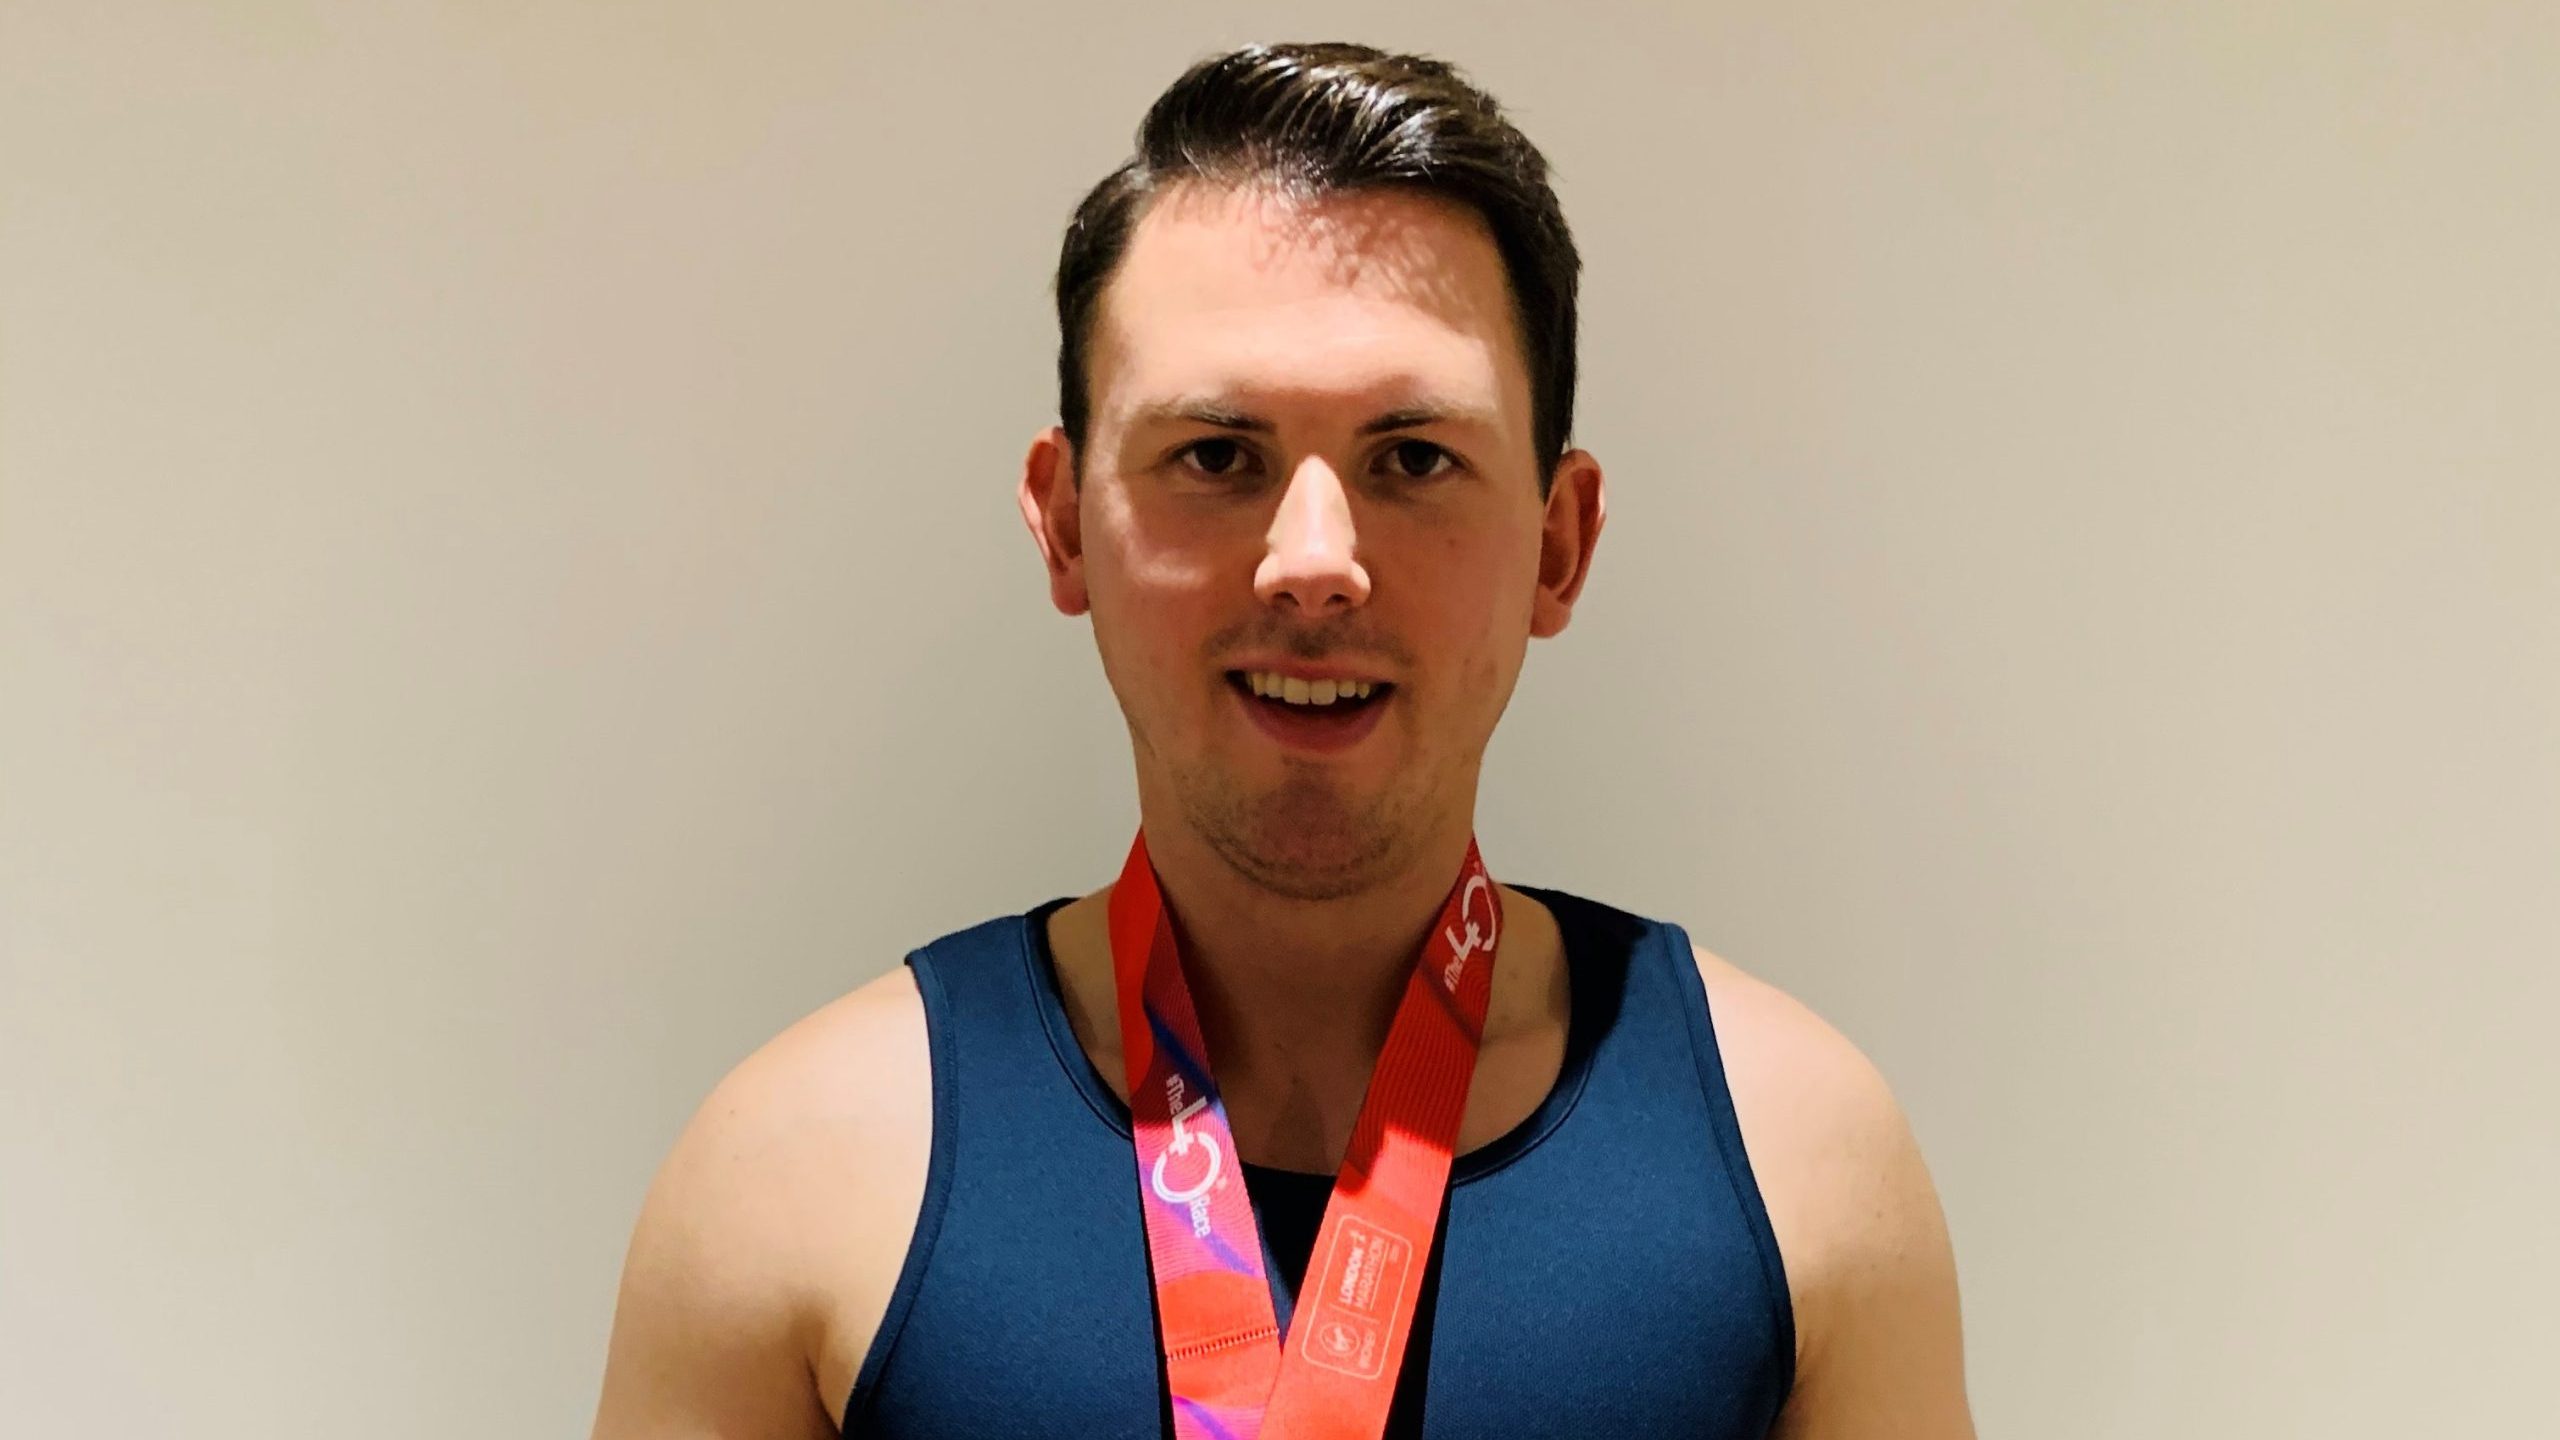 James standing facing the camera. He is wearing a Retina UK running vest and has a medal around his neck.